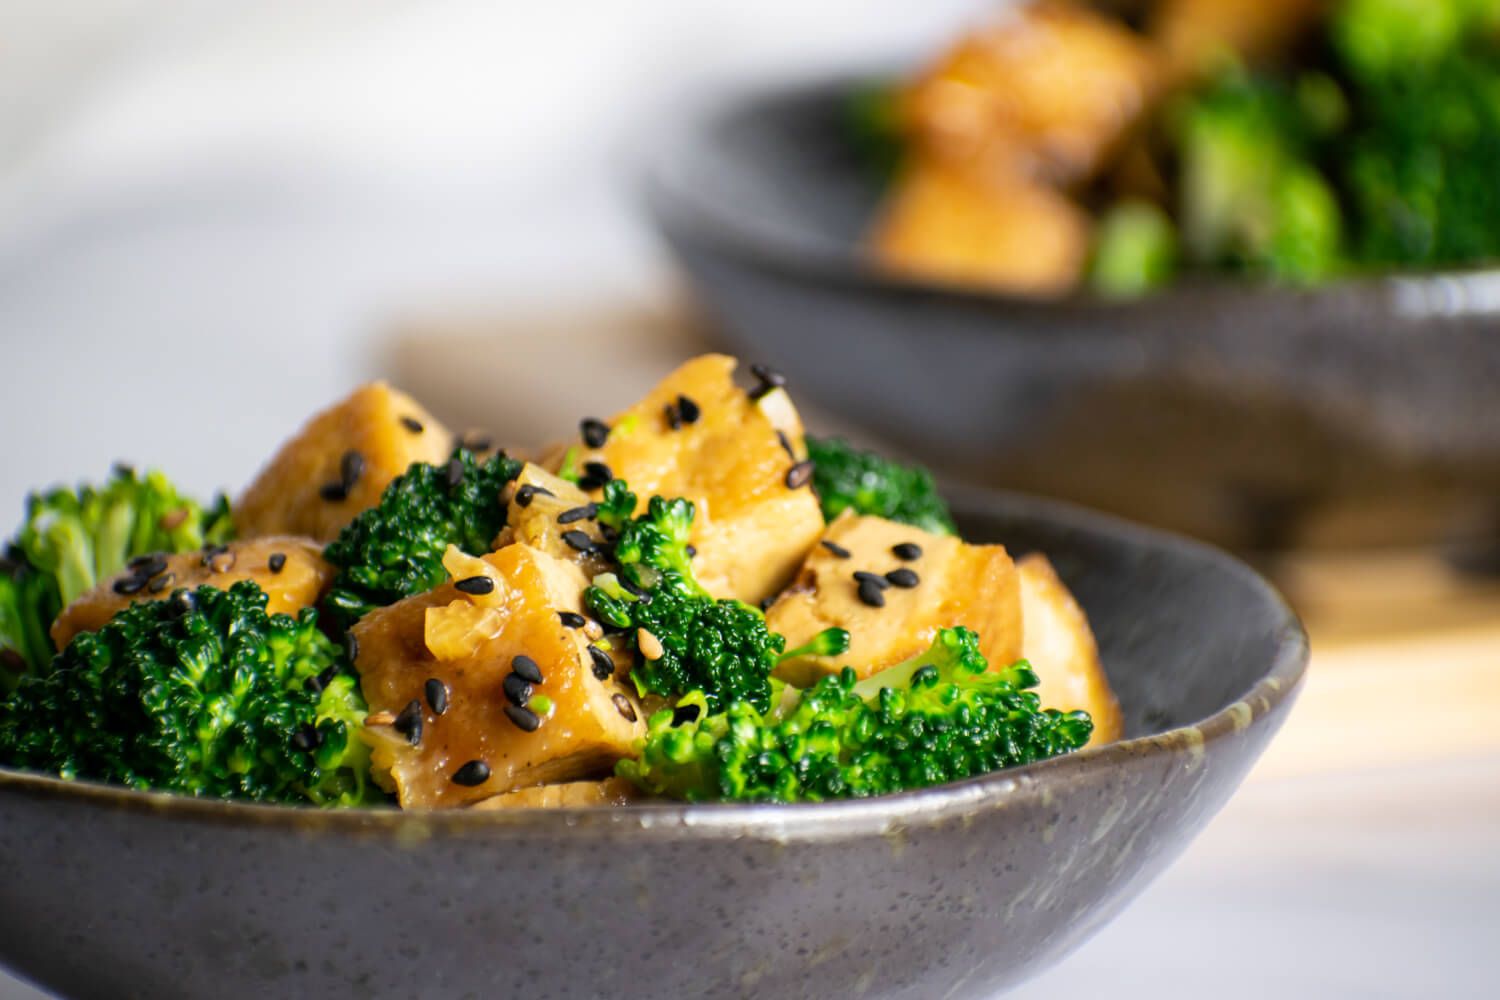 Sesame tofu with broccoli and sesame seeds in a small gray bowl.